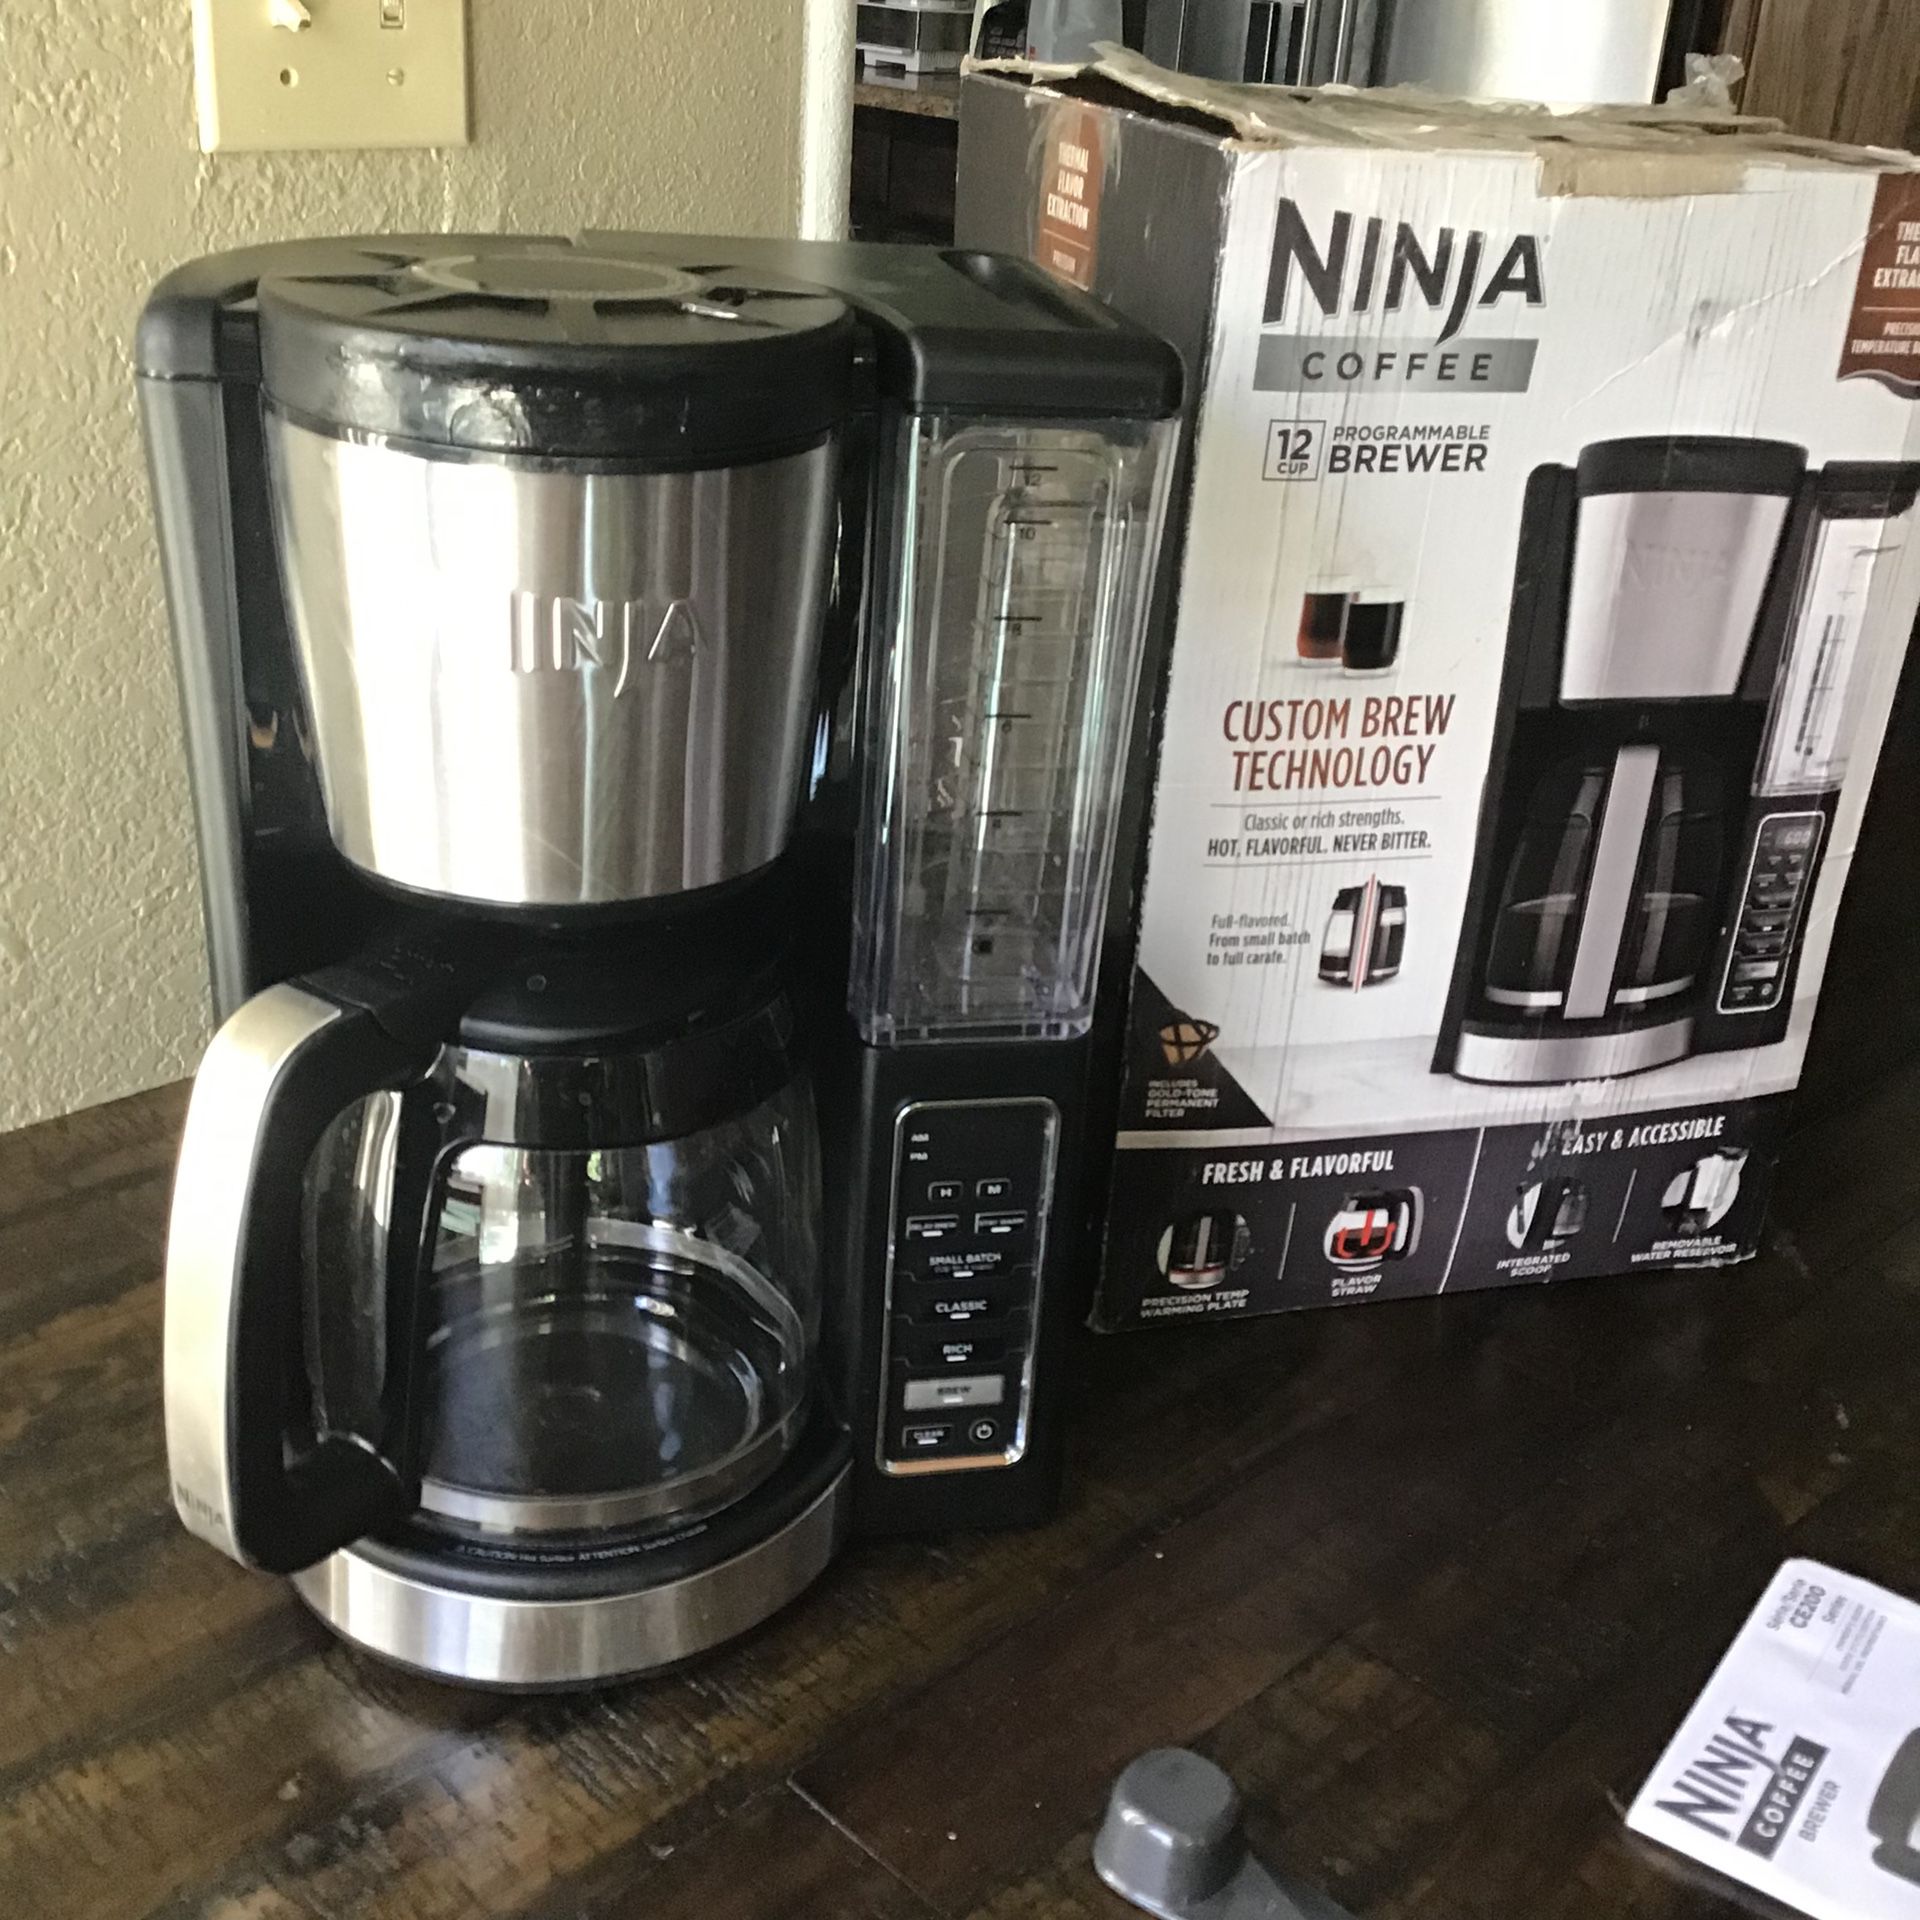 Ninja 12 cup custom brewer technology Programmable coffee maker open box new never been used excellent condition